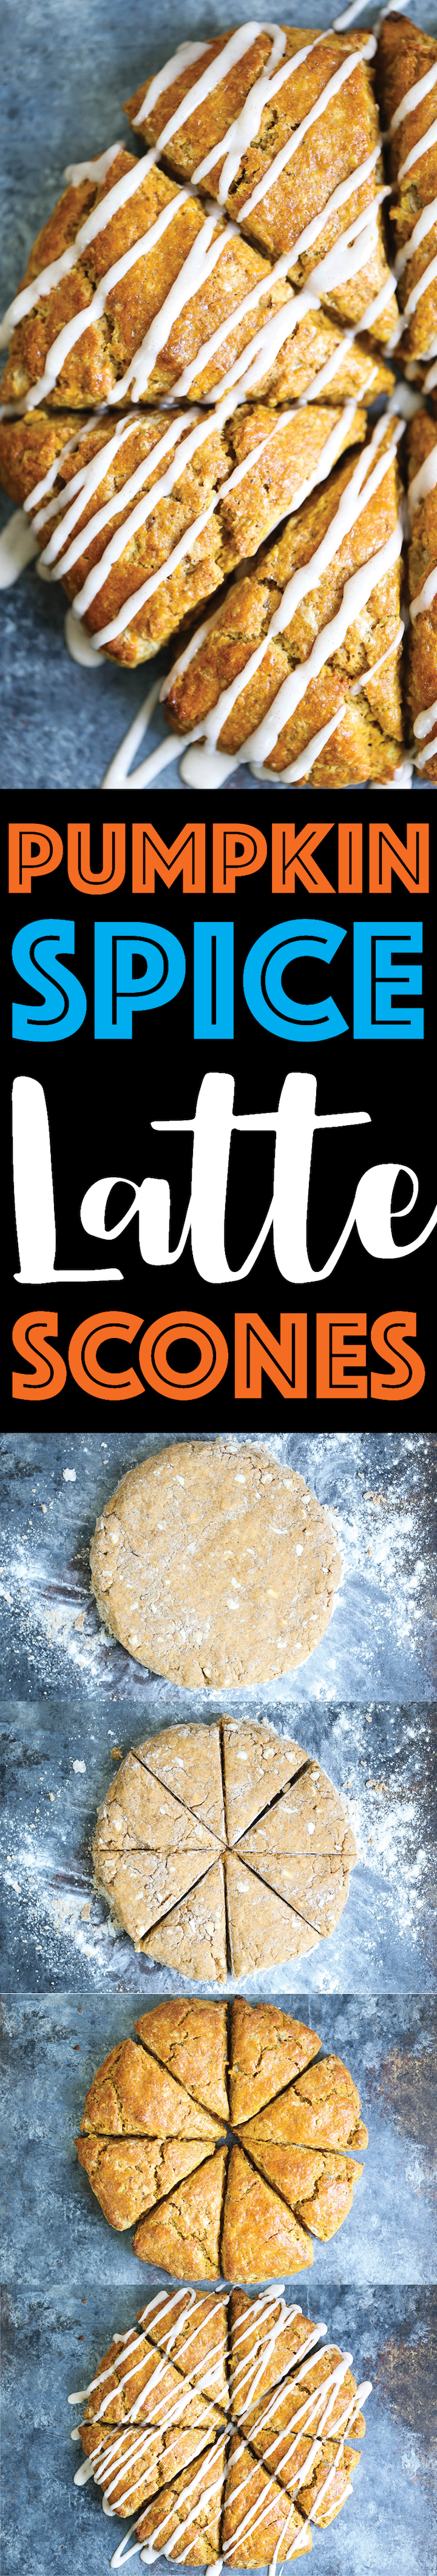 Pumpkin Spice Latte Scones - The most perfectly spiced pumpkin scones!  It basically tastes like a pumpkin spice latte, except with a cinnamon glaze drizzle!